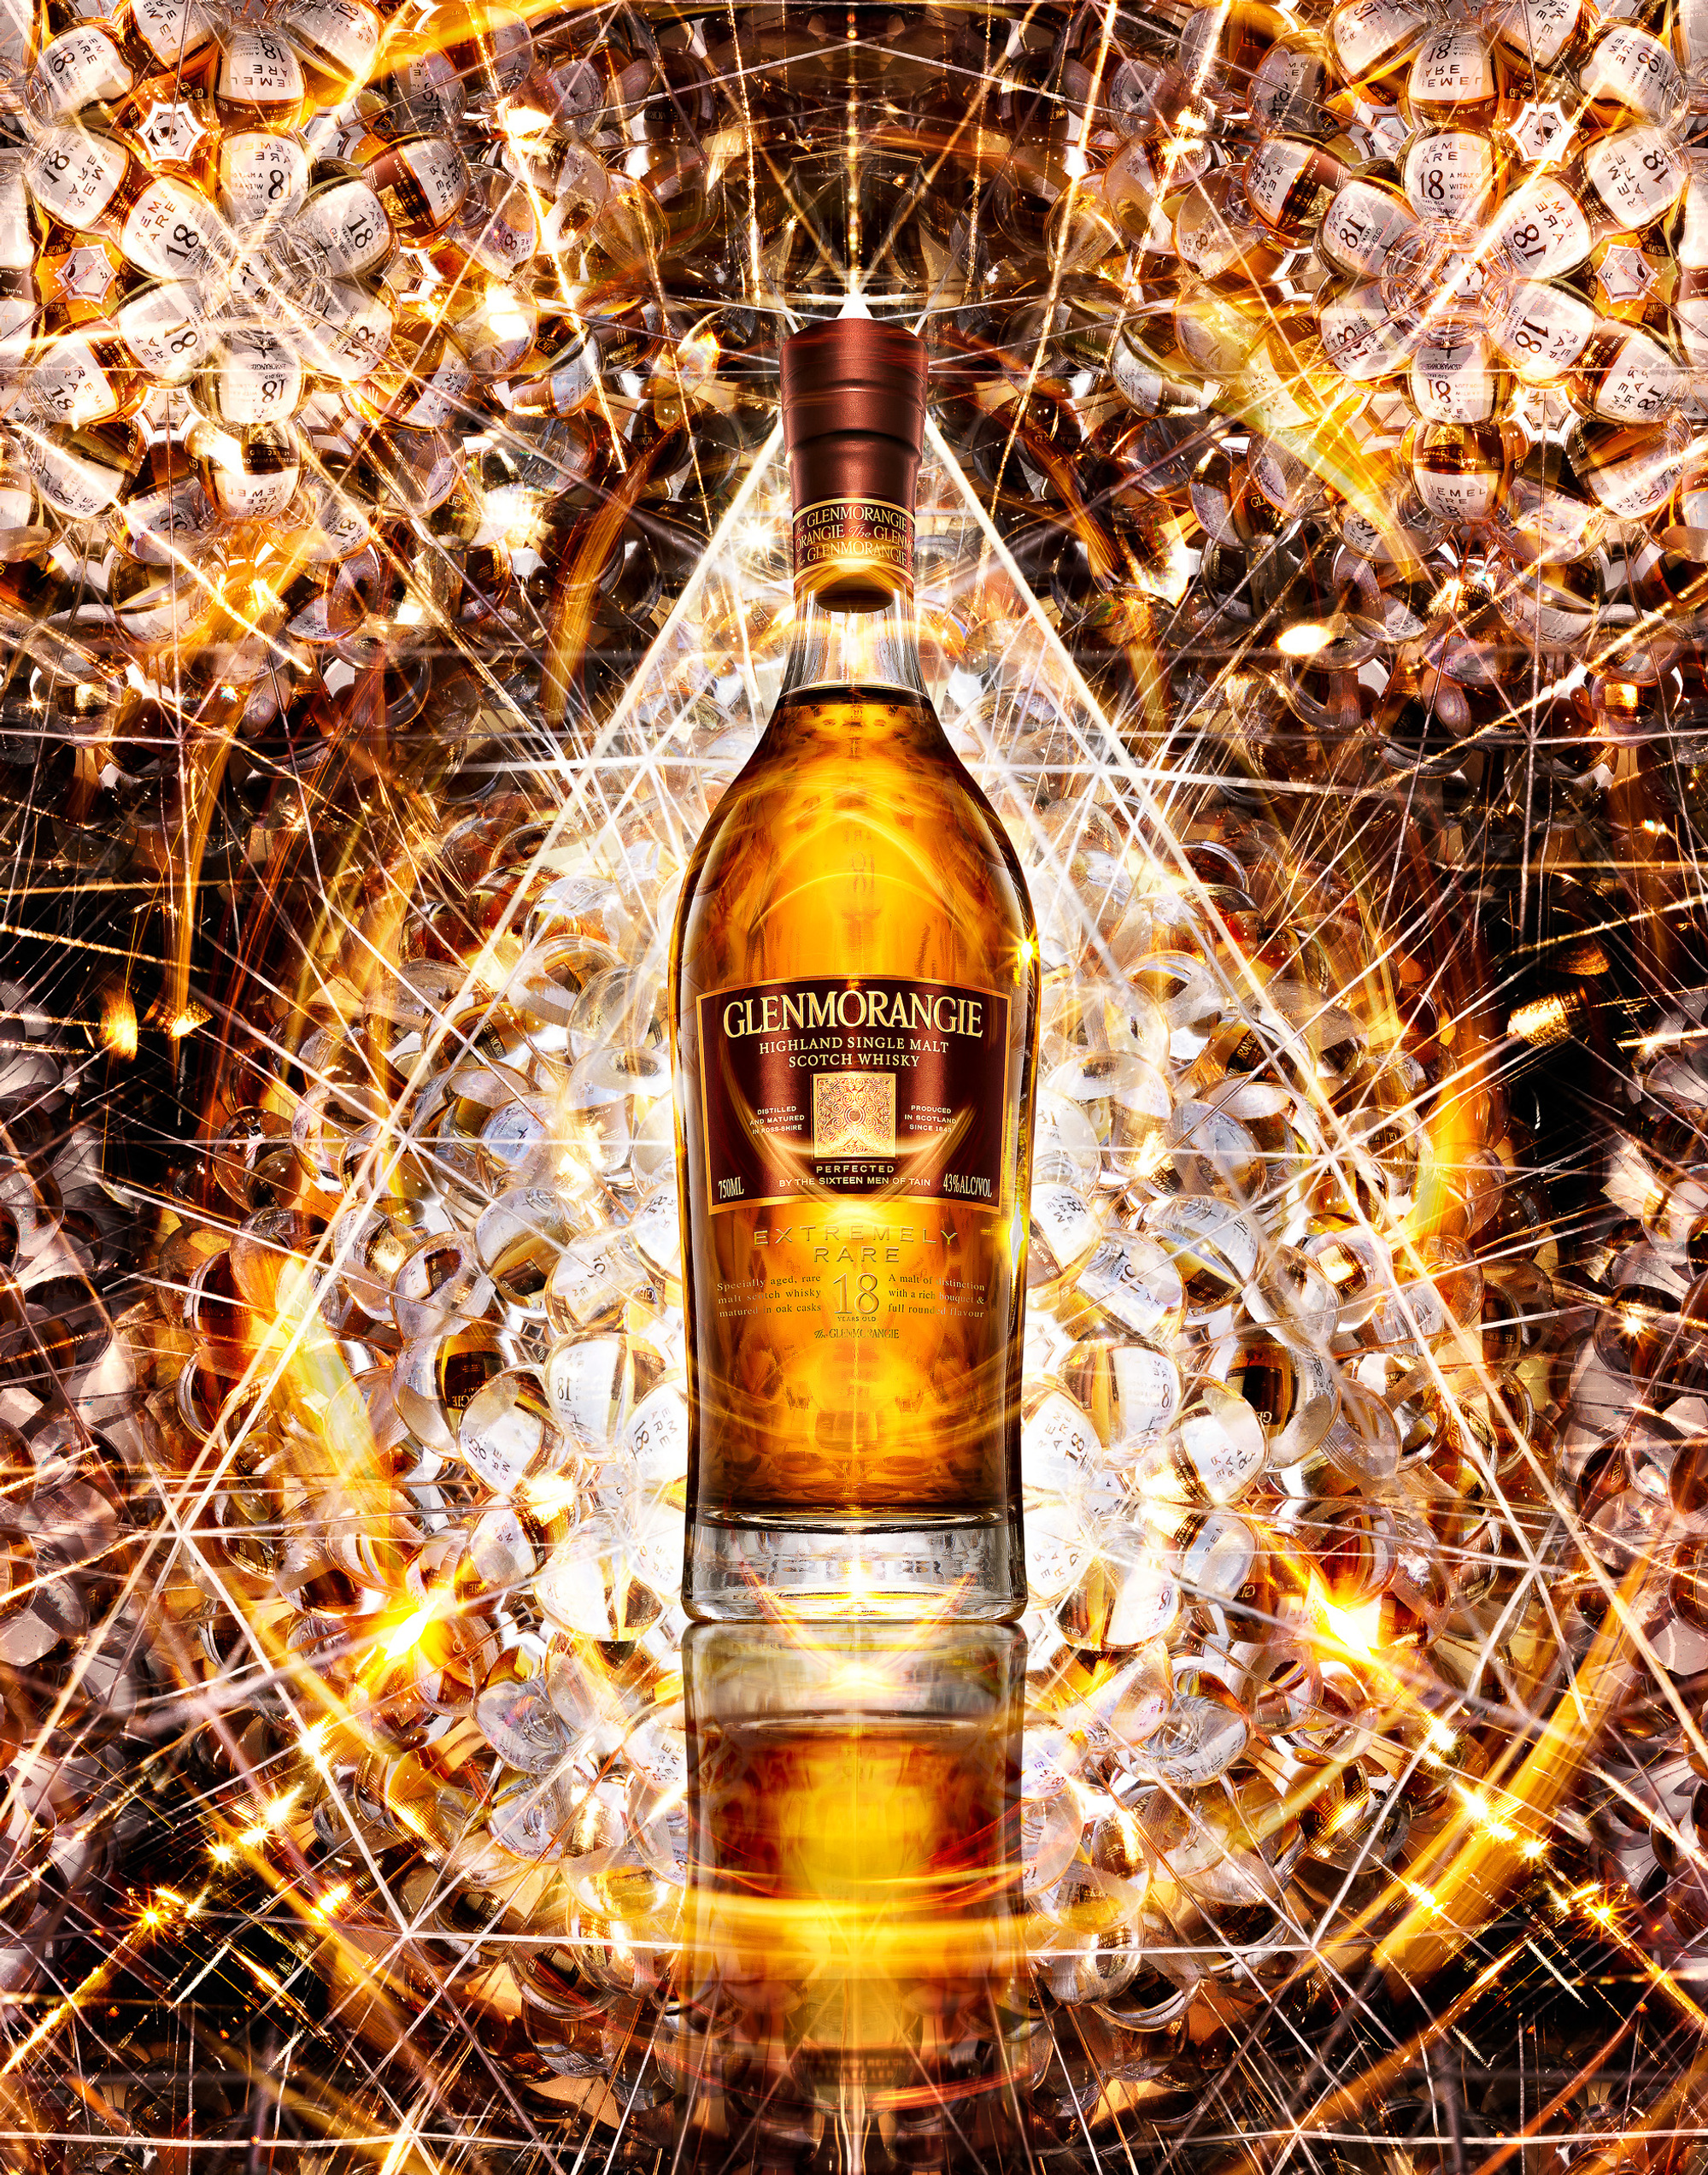 Glenmorangie Single malt whisky bottle product and advertising photography by Timothy Hogan in Los Angeles